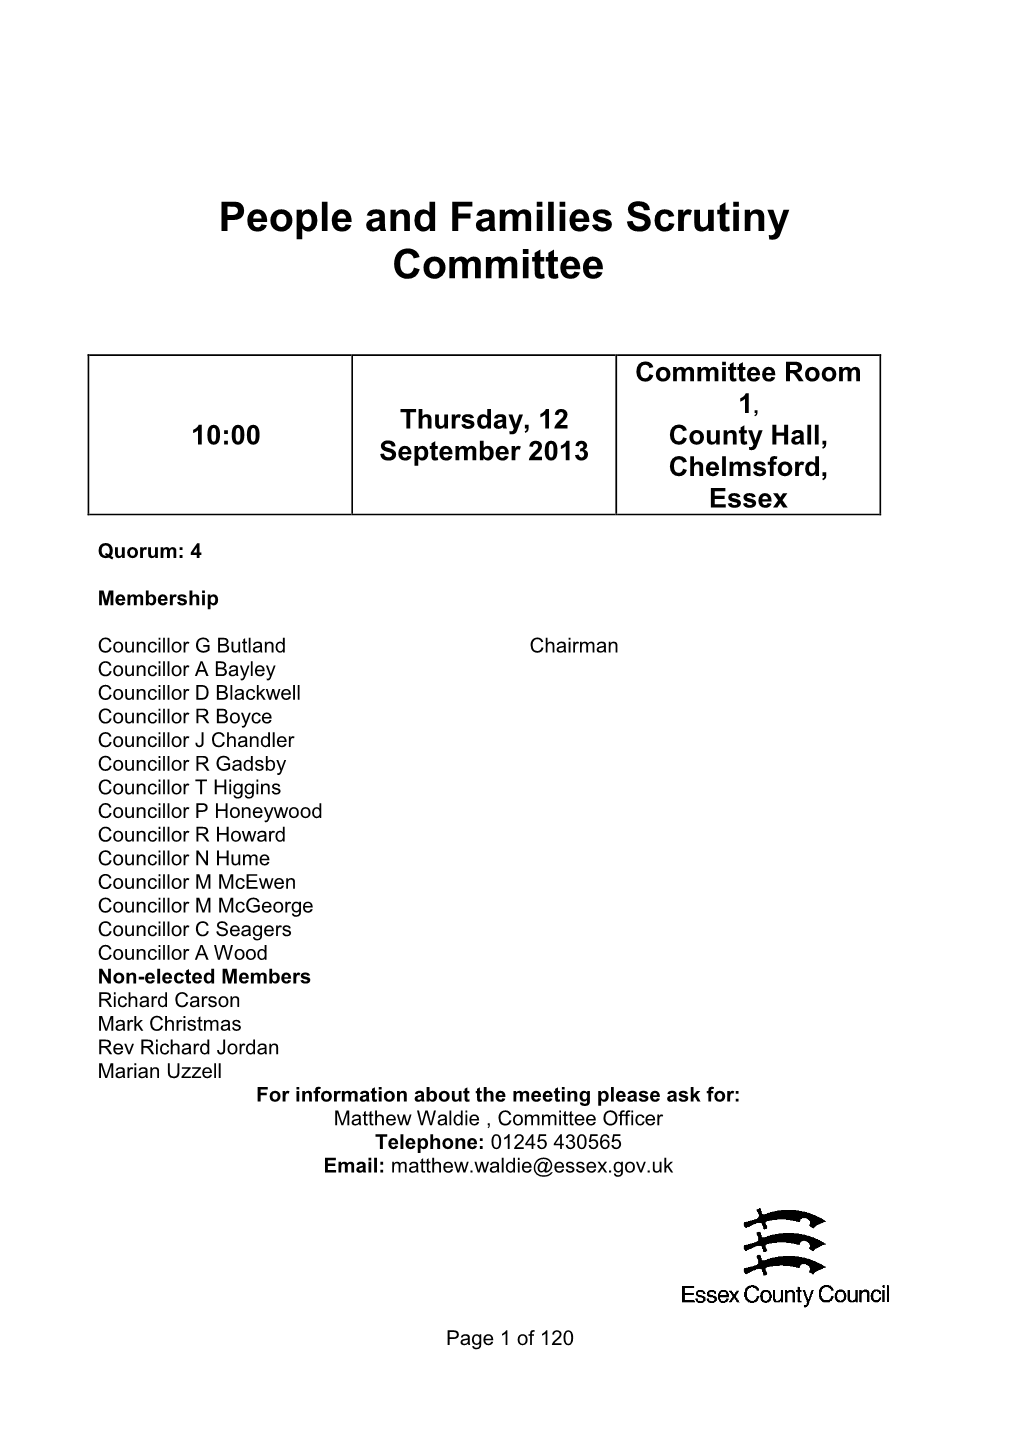 People and Families Scrutiny Committee